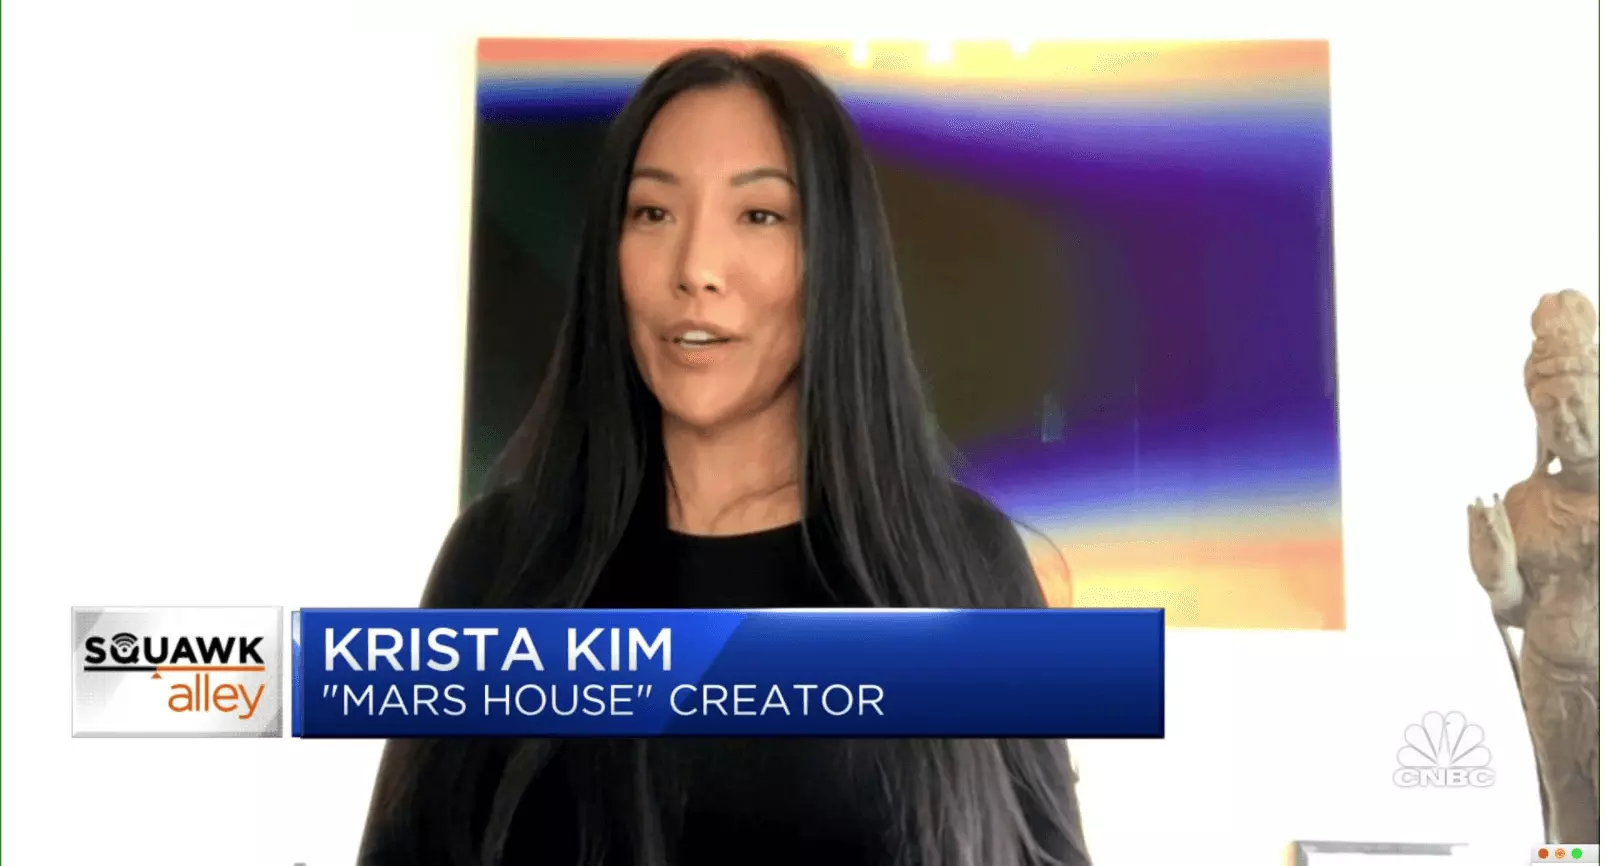 Watch_the_full_video_interview_with_Krista_Kim_here.png